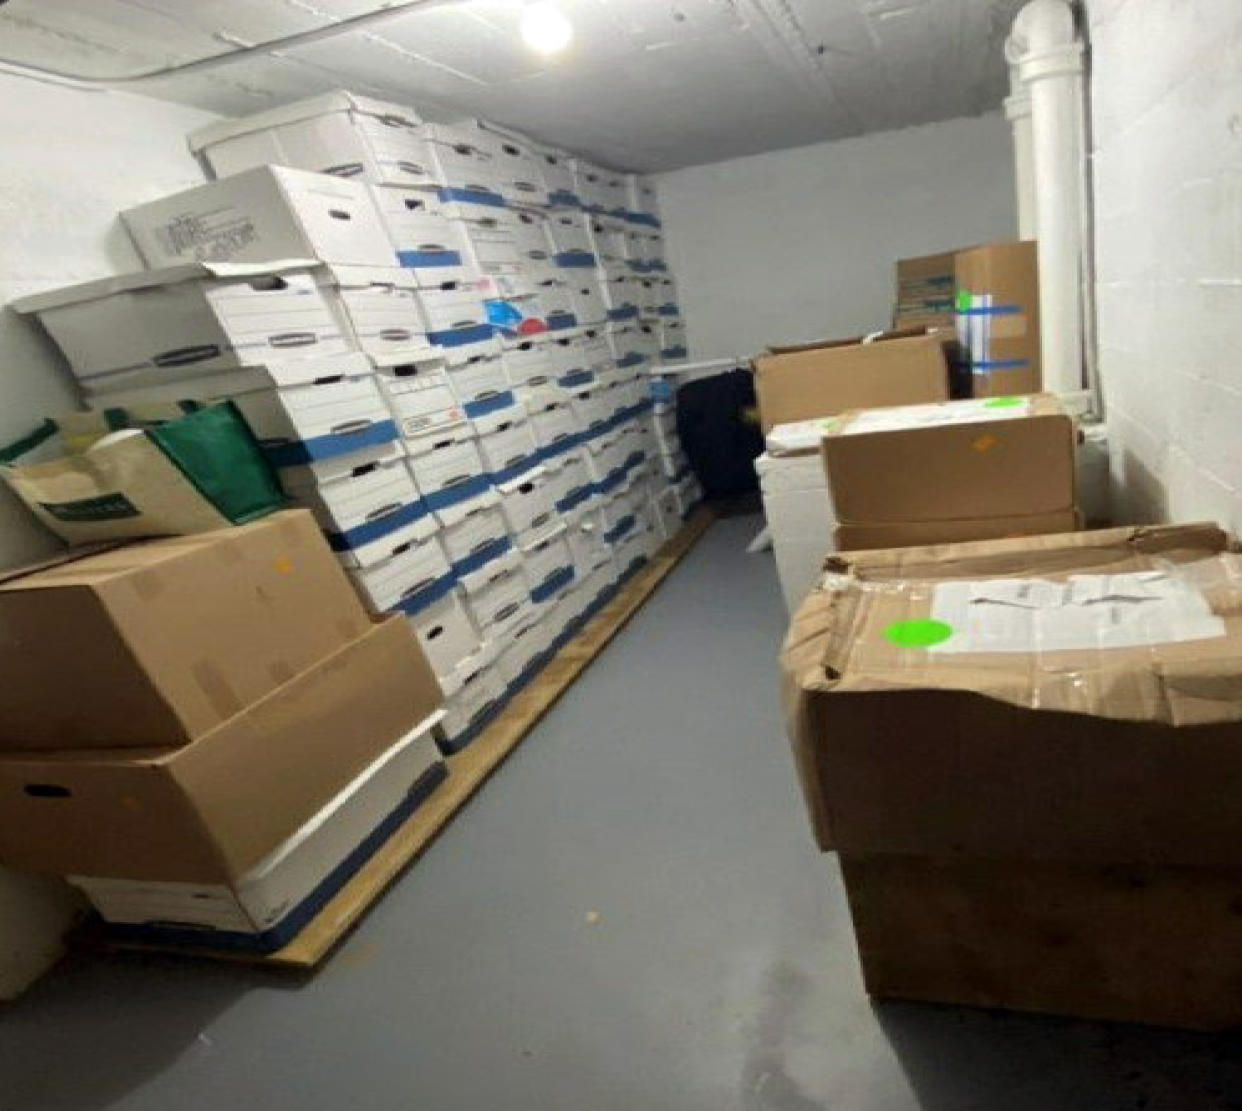 This image, included in the indictment, shows boxes of records piled in a stack eight boxes wide and seven boxes deep.